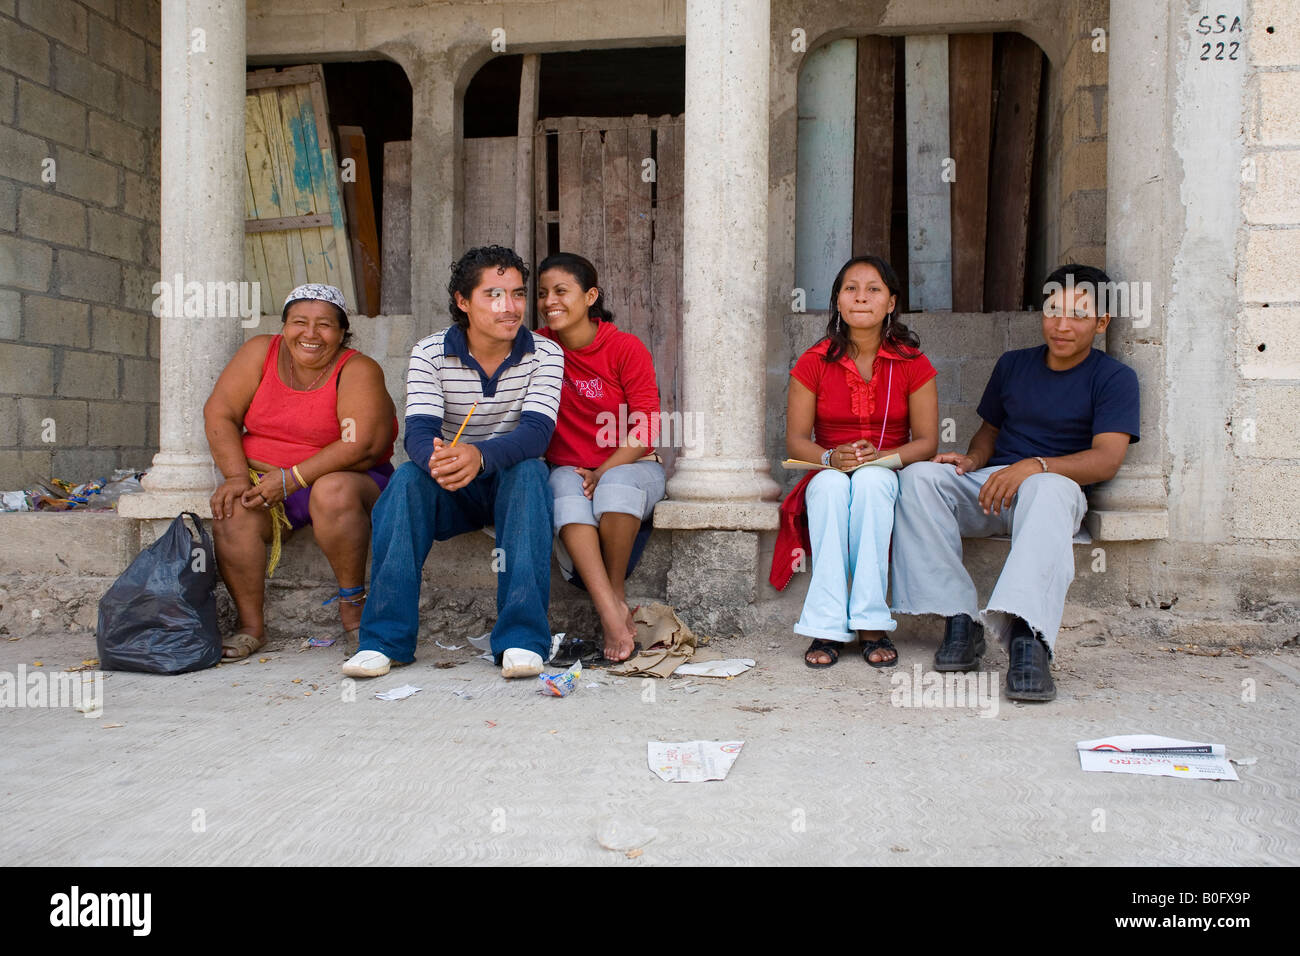 MEXICAN PEOPLE WITH MAYAN FACE CHARACTERISTICS SITING DOWN AT THE STEPS OF A BUILDING WHILE WAITING FOR THE BUS Stock Photo